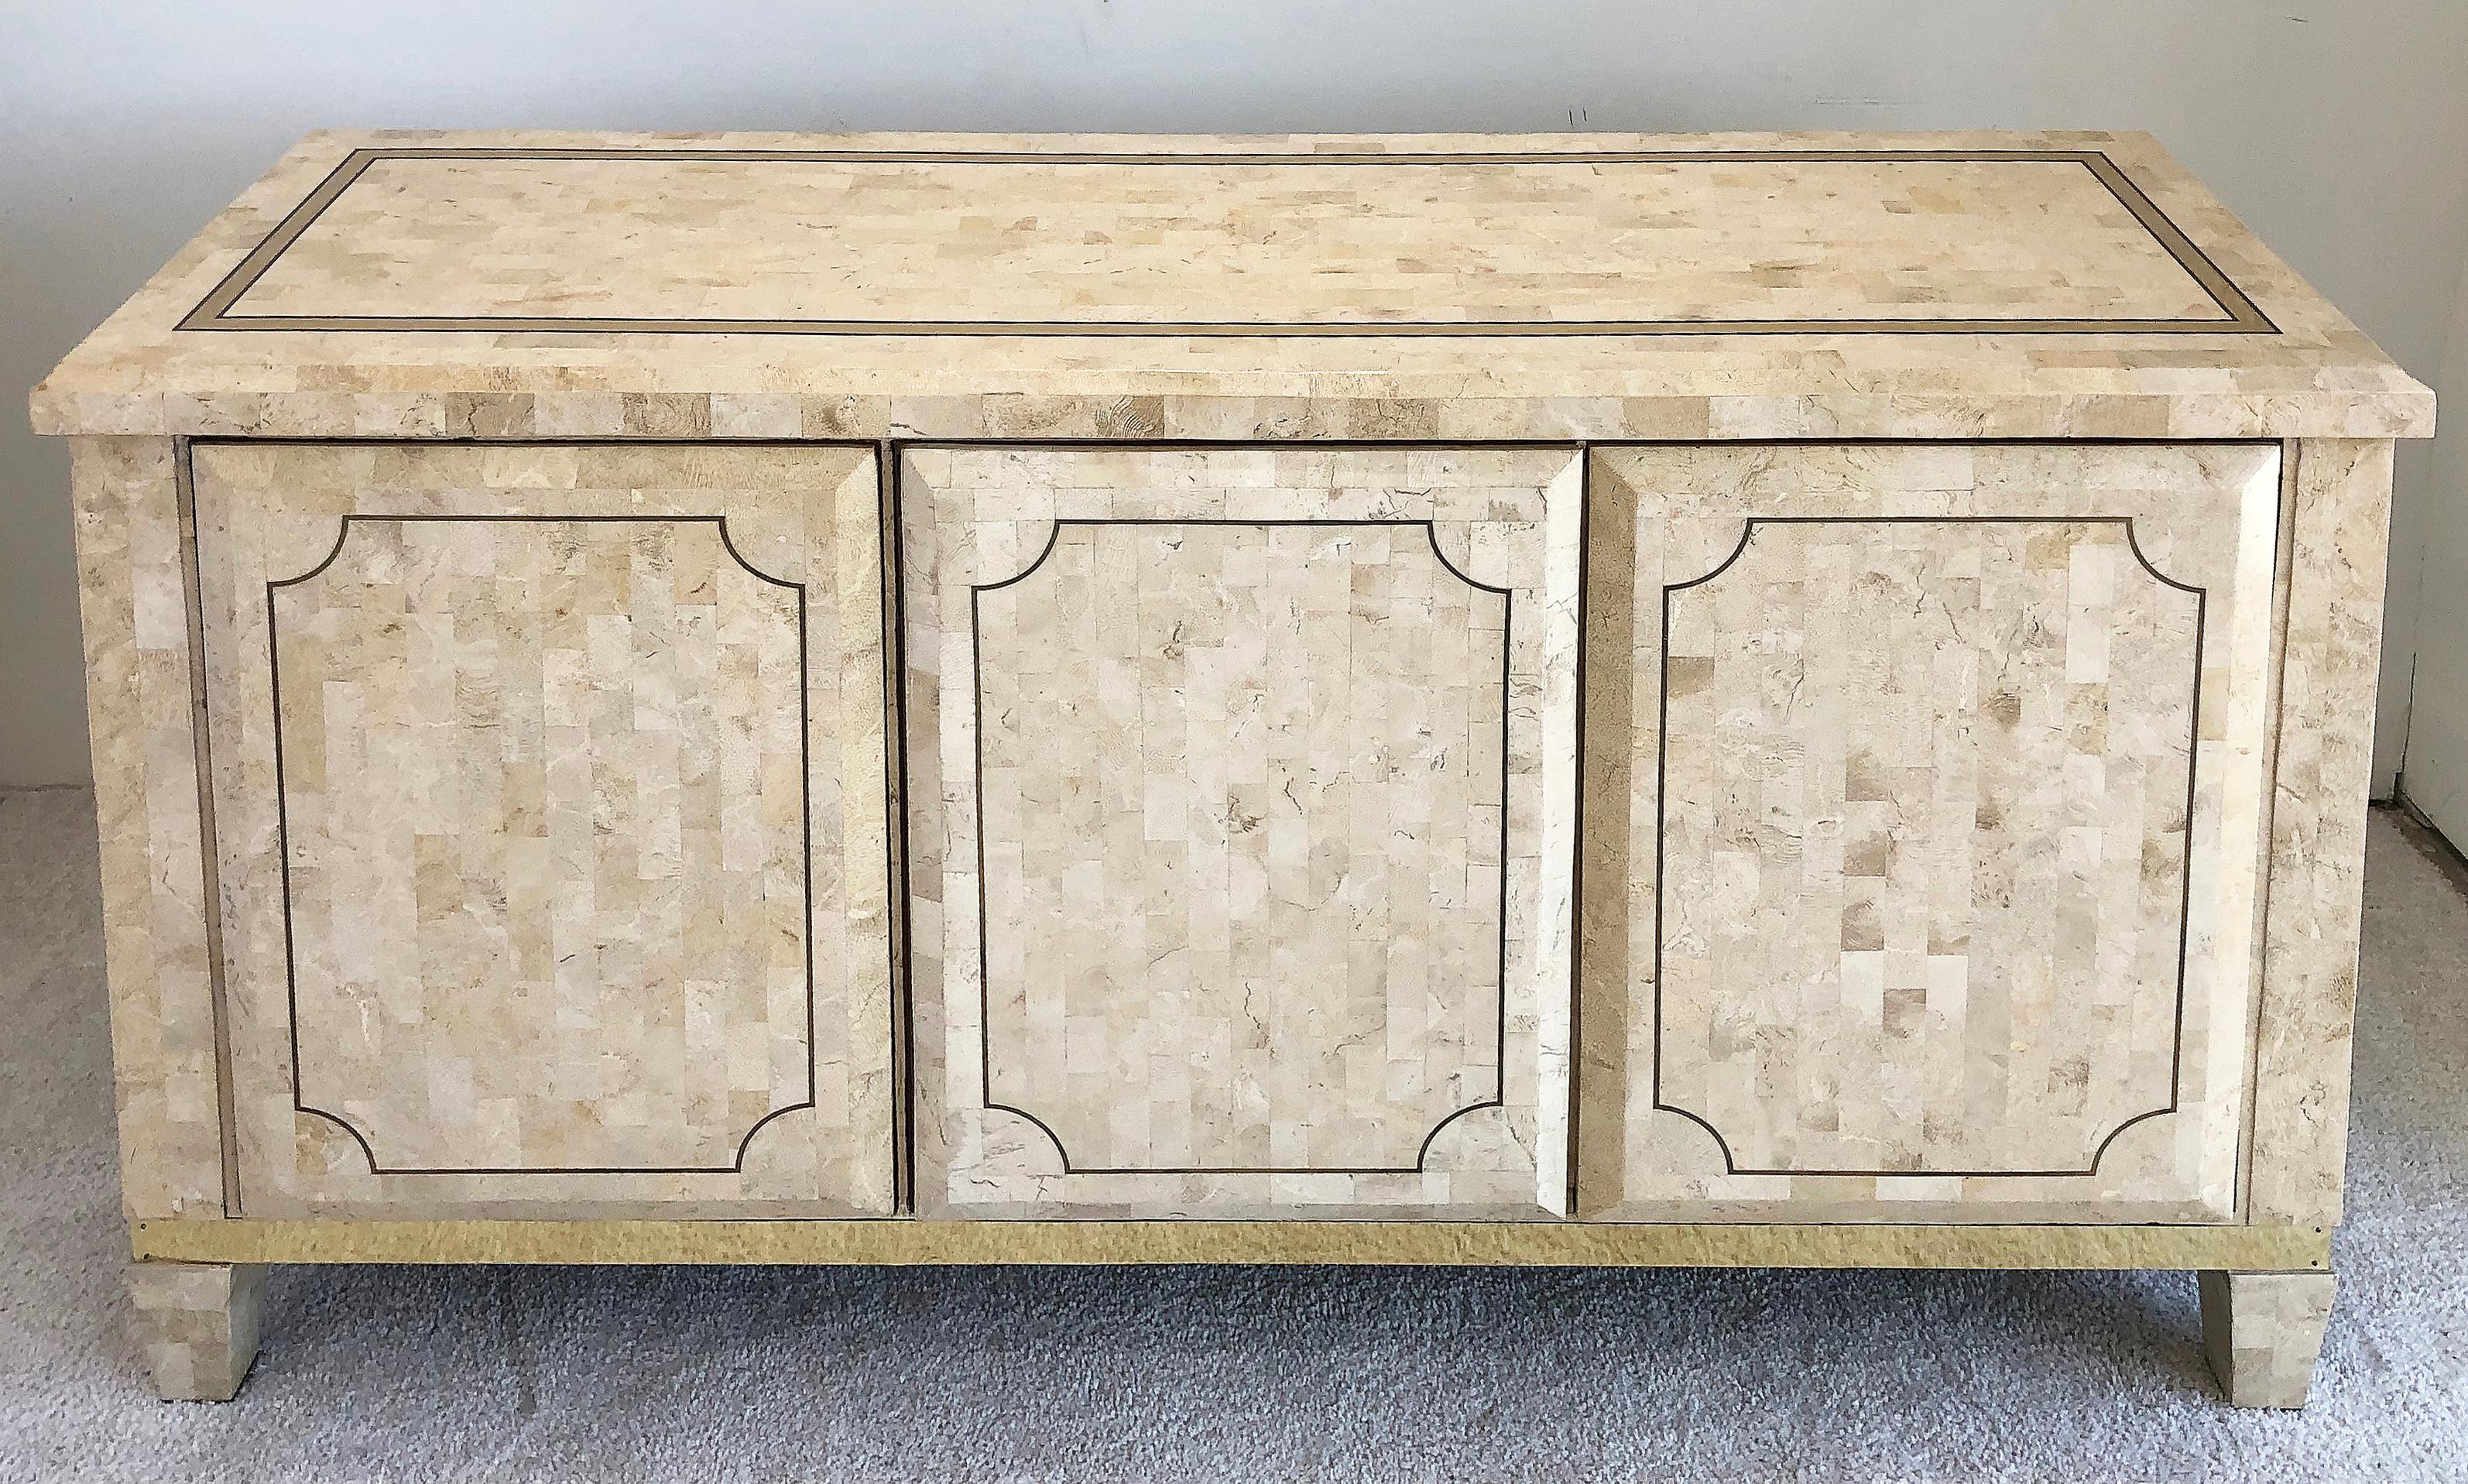 Midcentury Maitland-Smith tessellated stone credenza with brass

Offered for sale is a stunning Mid-Century Modern tessellated stone Maitland Smith credenza. The cabinet has brass inlay and brass details near the base.
The interior of the cabinet